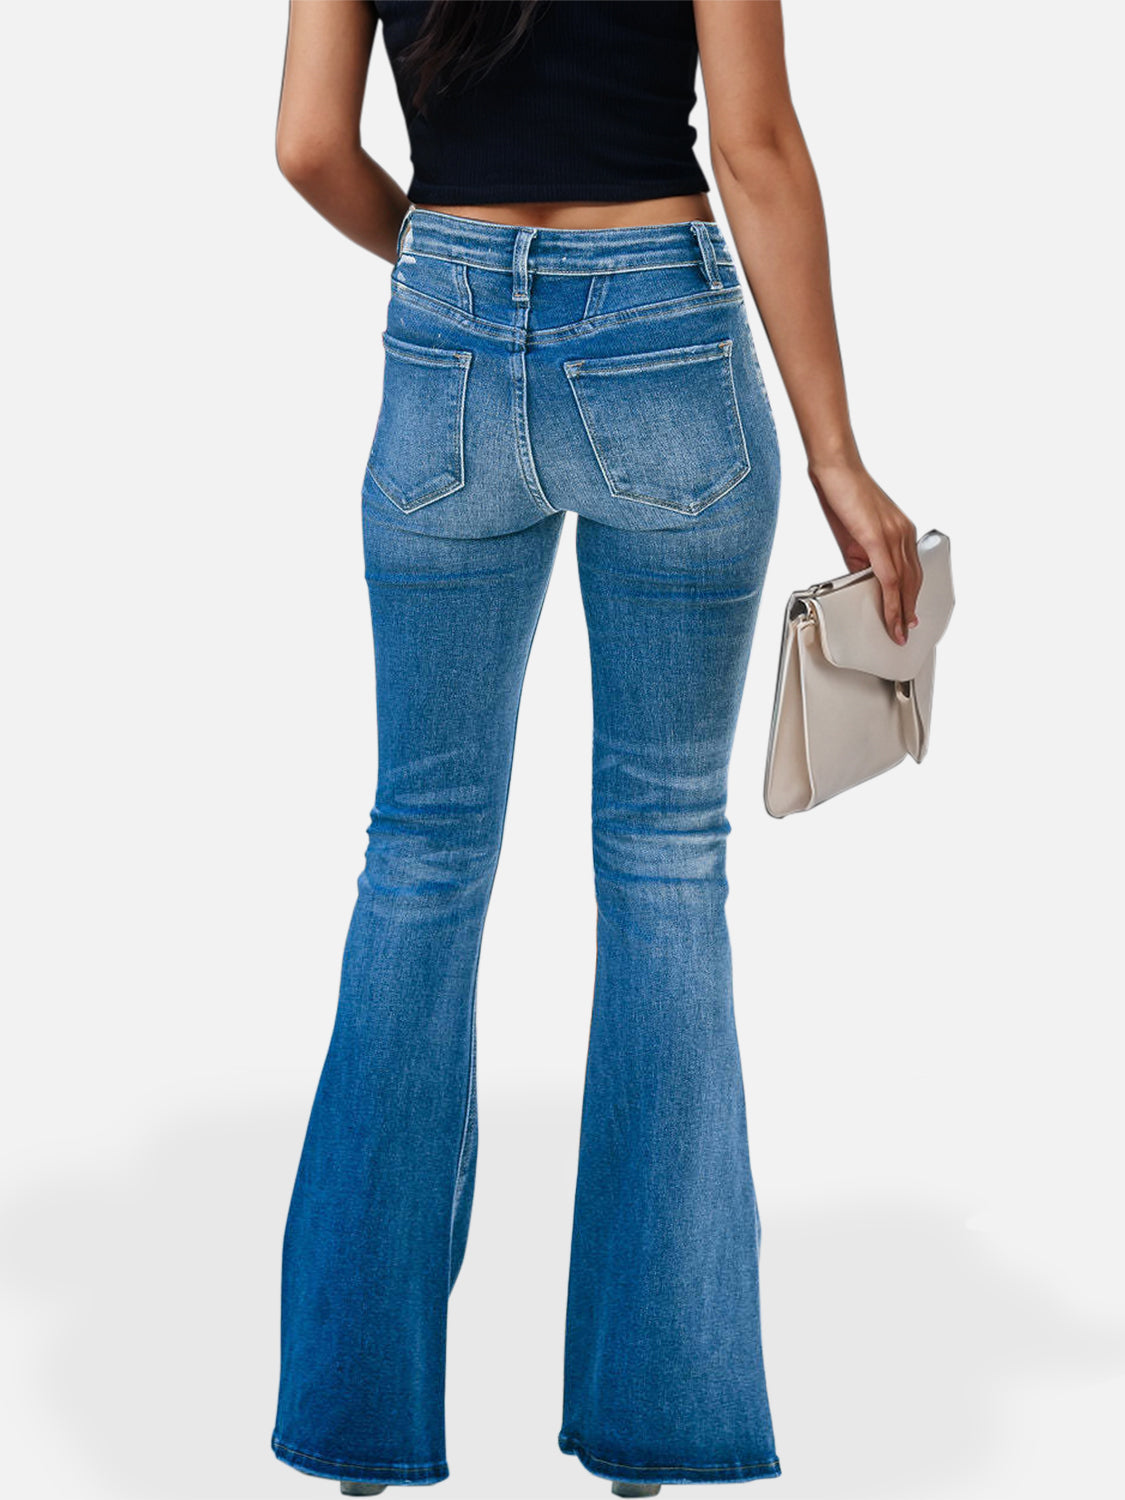 Trendsetting woman sporting high-waist bootcut denim jeans, ideal for a chic throwback look.